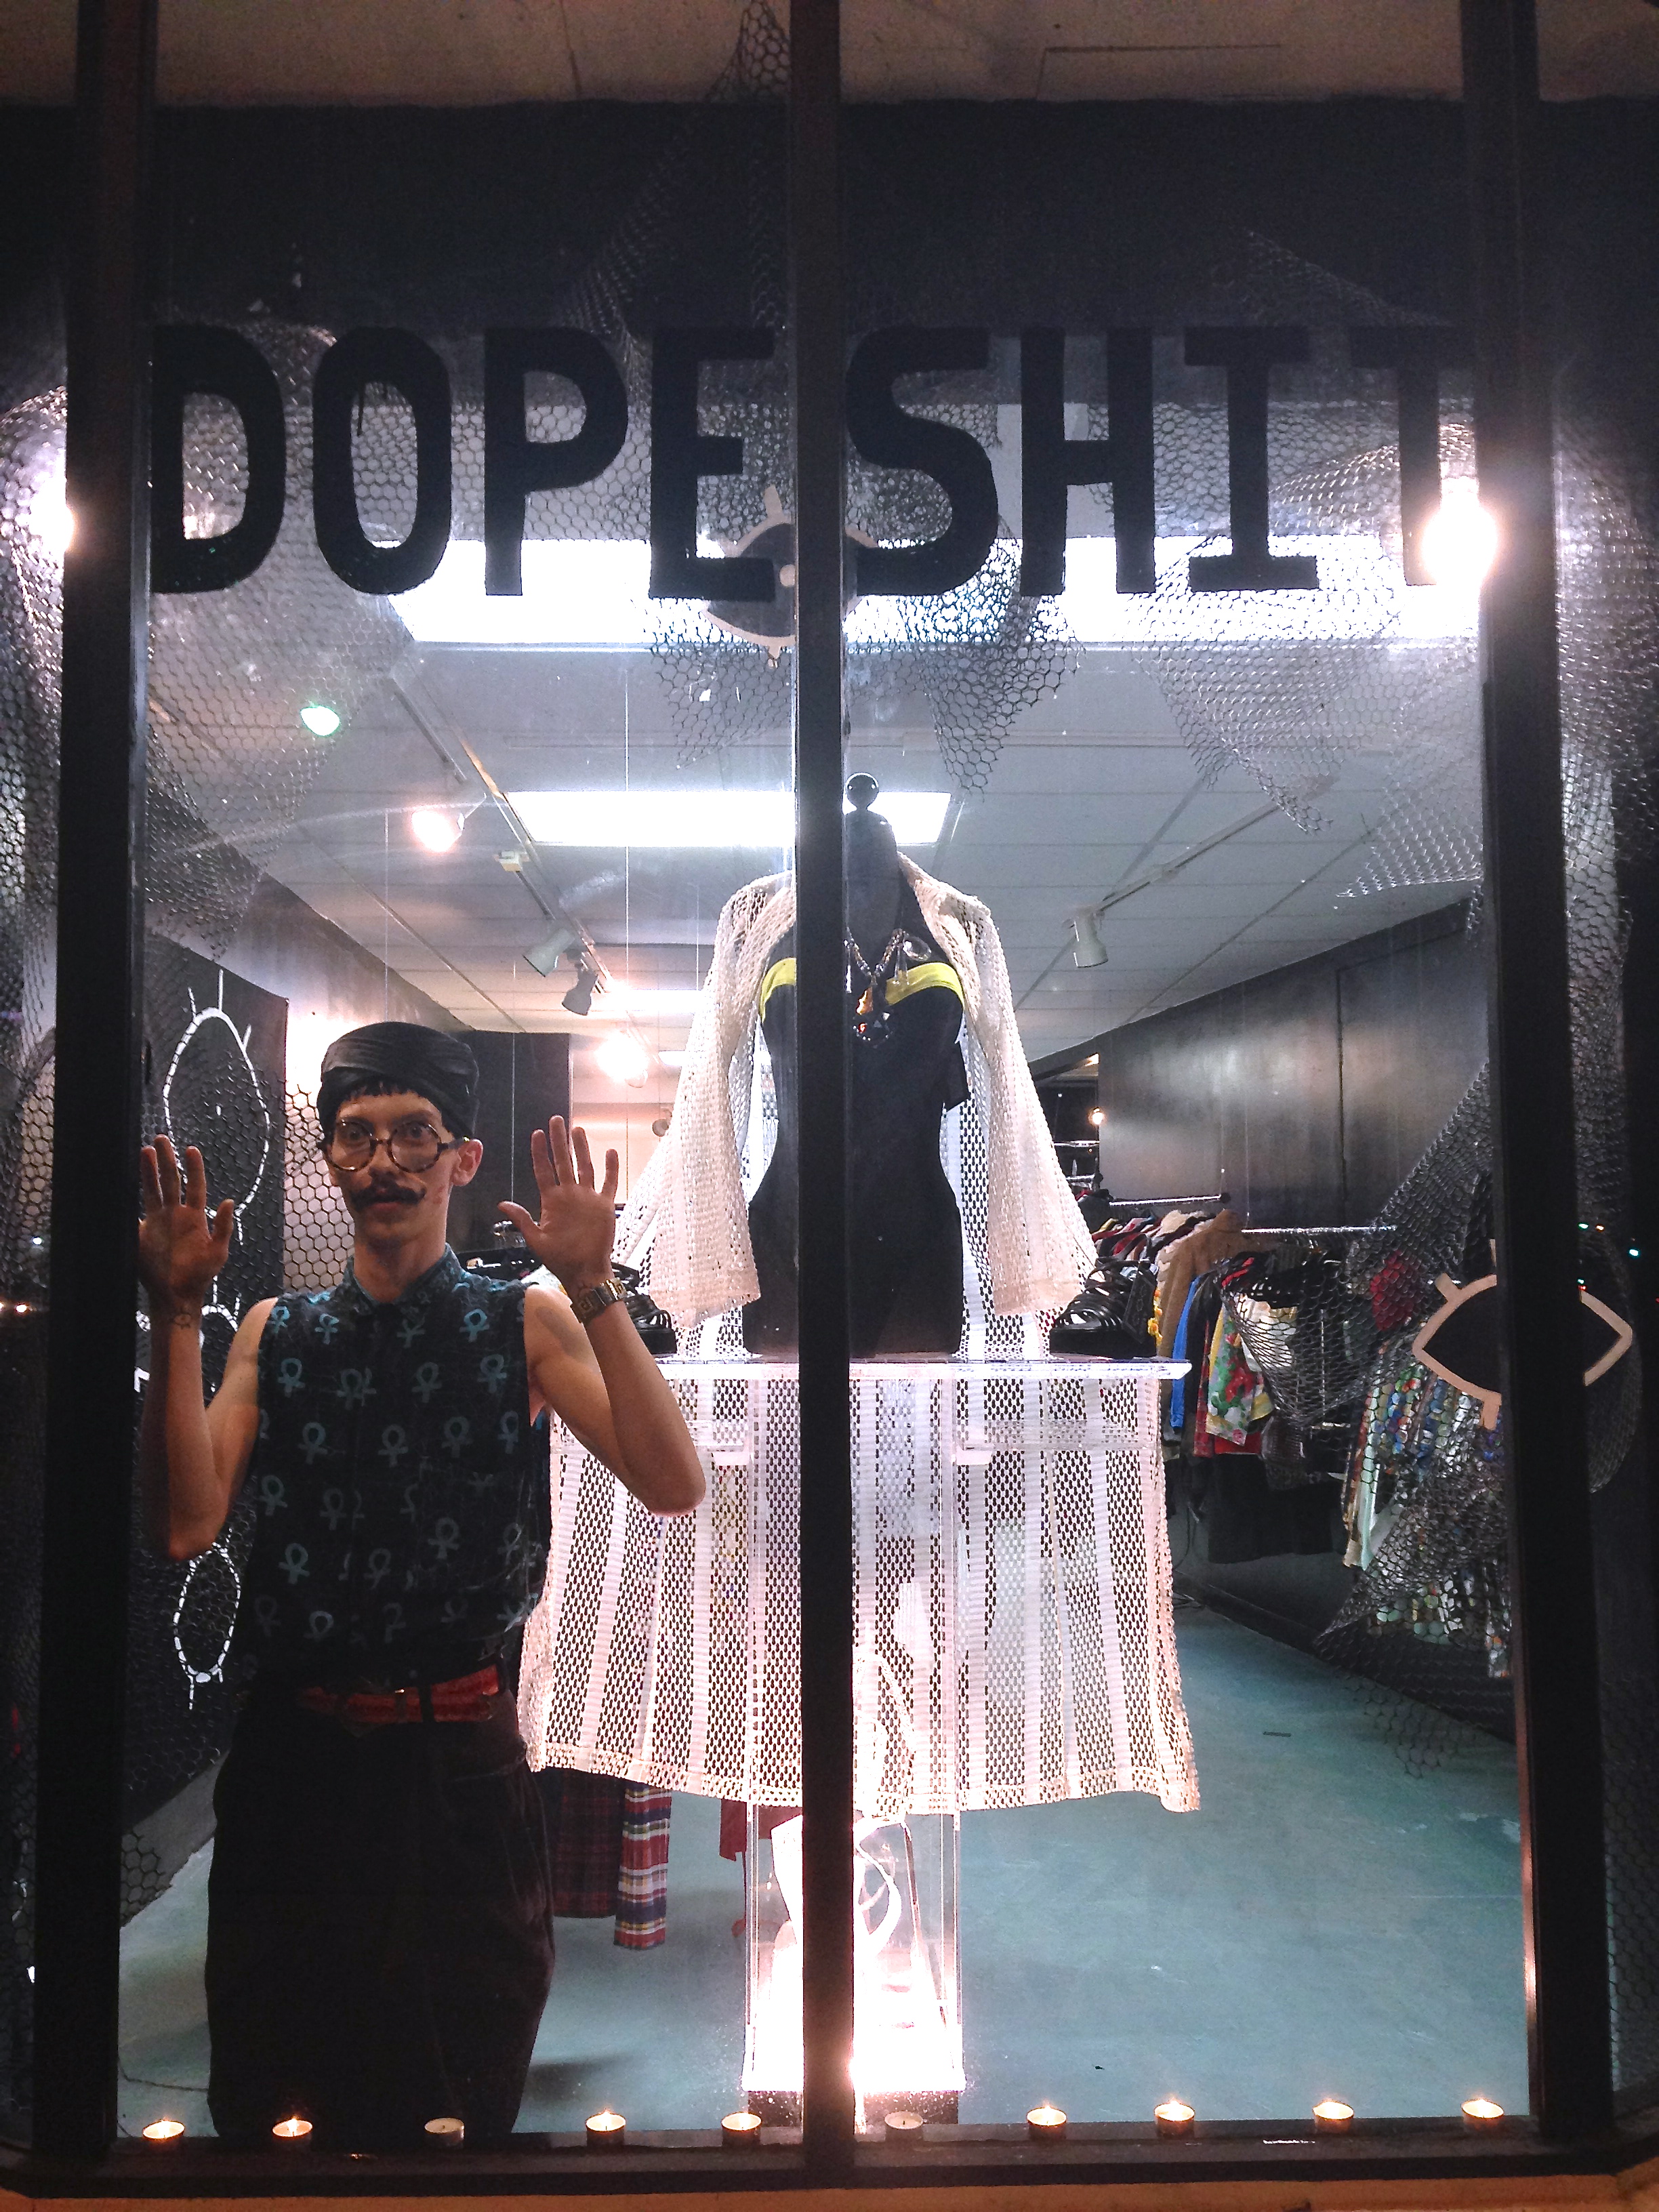 Sebastian started Dope Shit as a pop-up in 2012 after he had "amassed so much dope clothing [he] had to start selling it...There was no room left!"